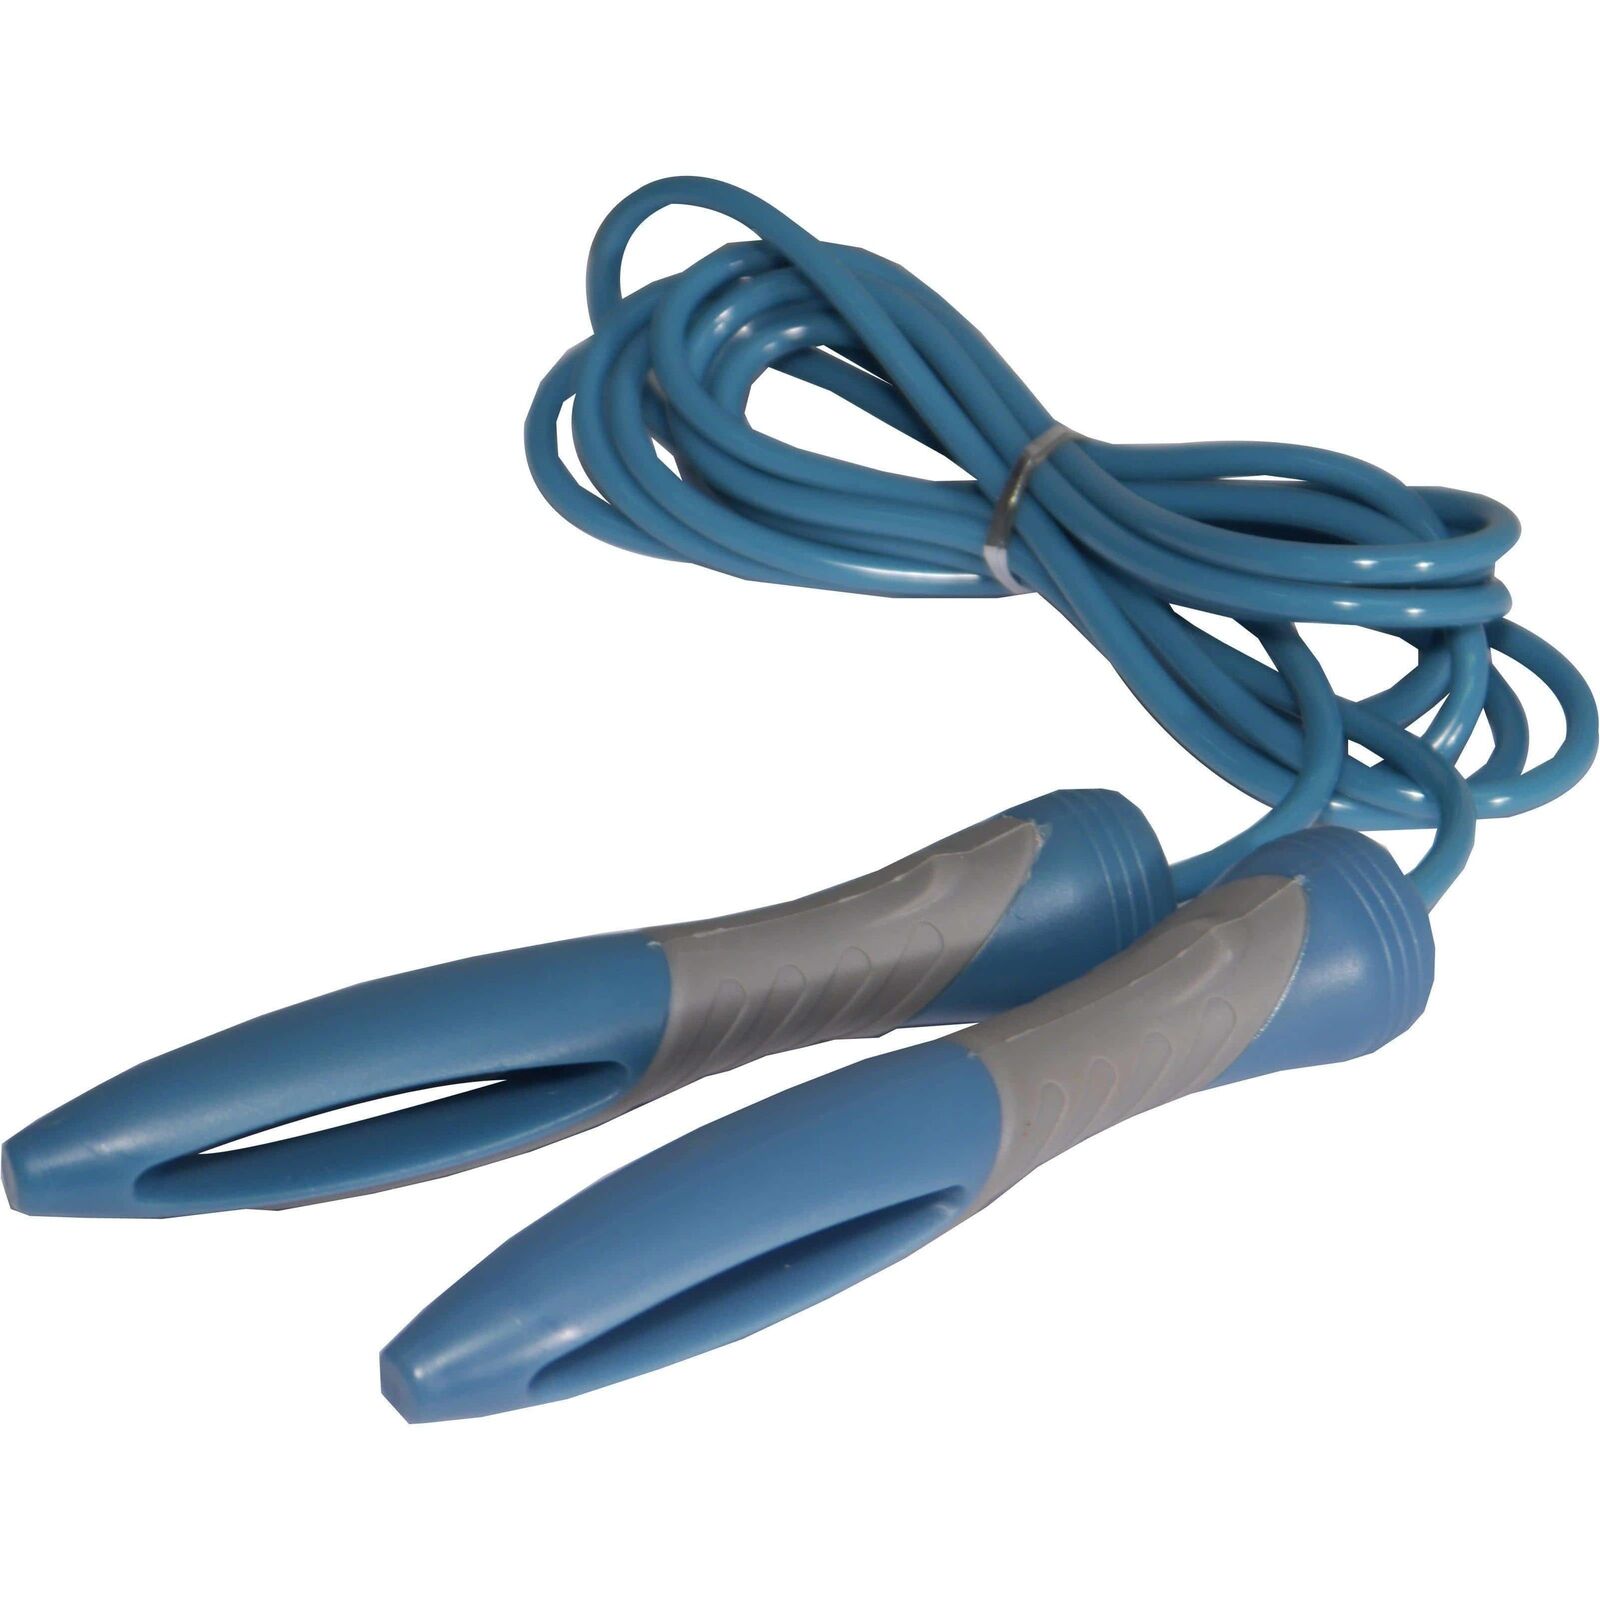 More Mile Speed Skipping Rope Blue 2.7m Home Gym Exercise Fitness Workout Skip